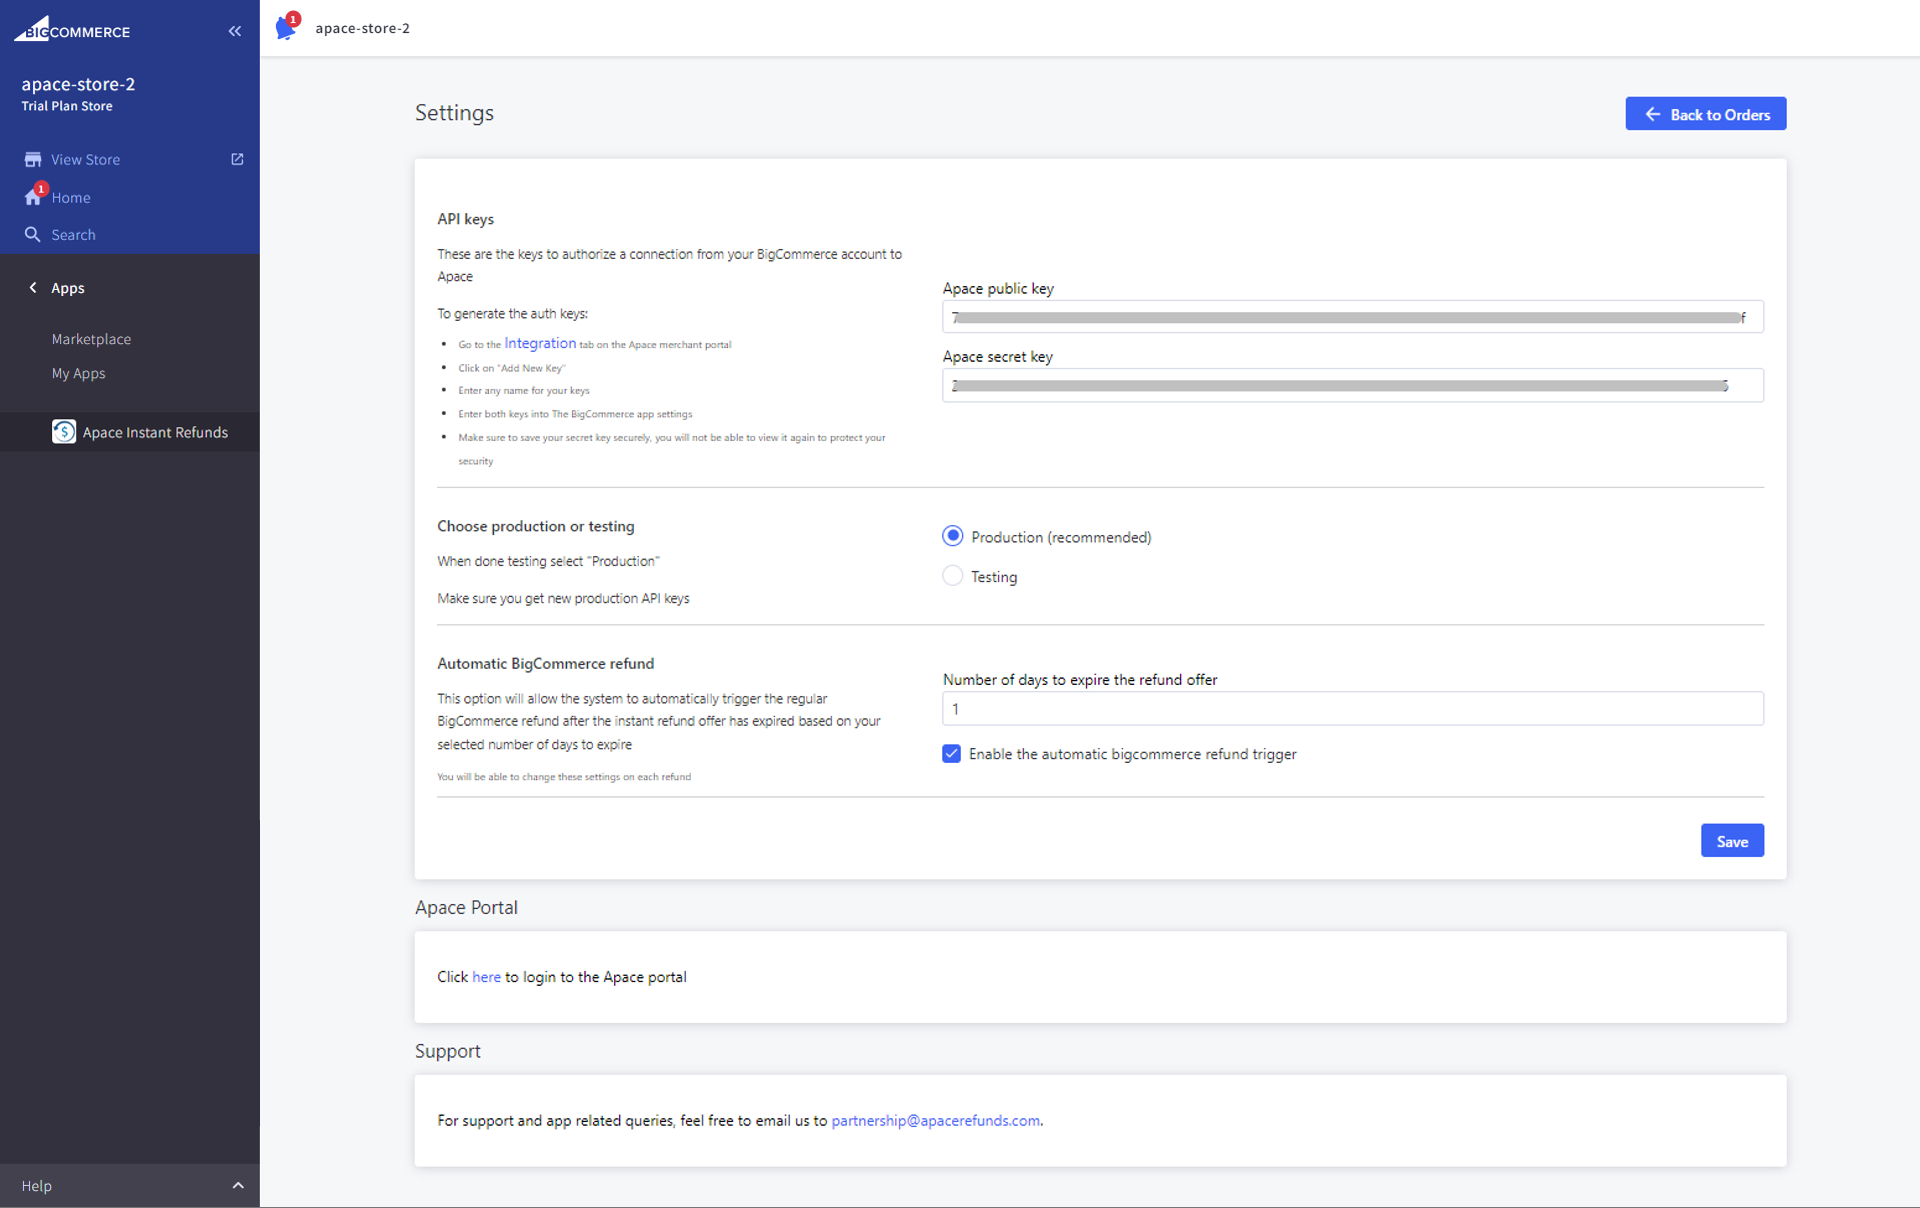 The Apace app settings page within BigCommerce